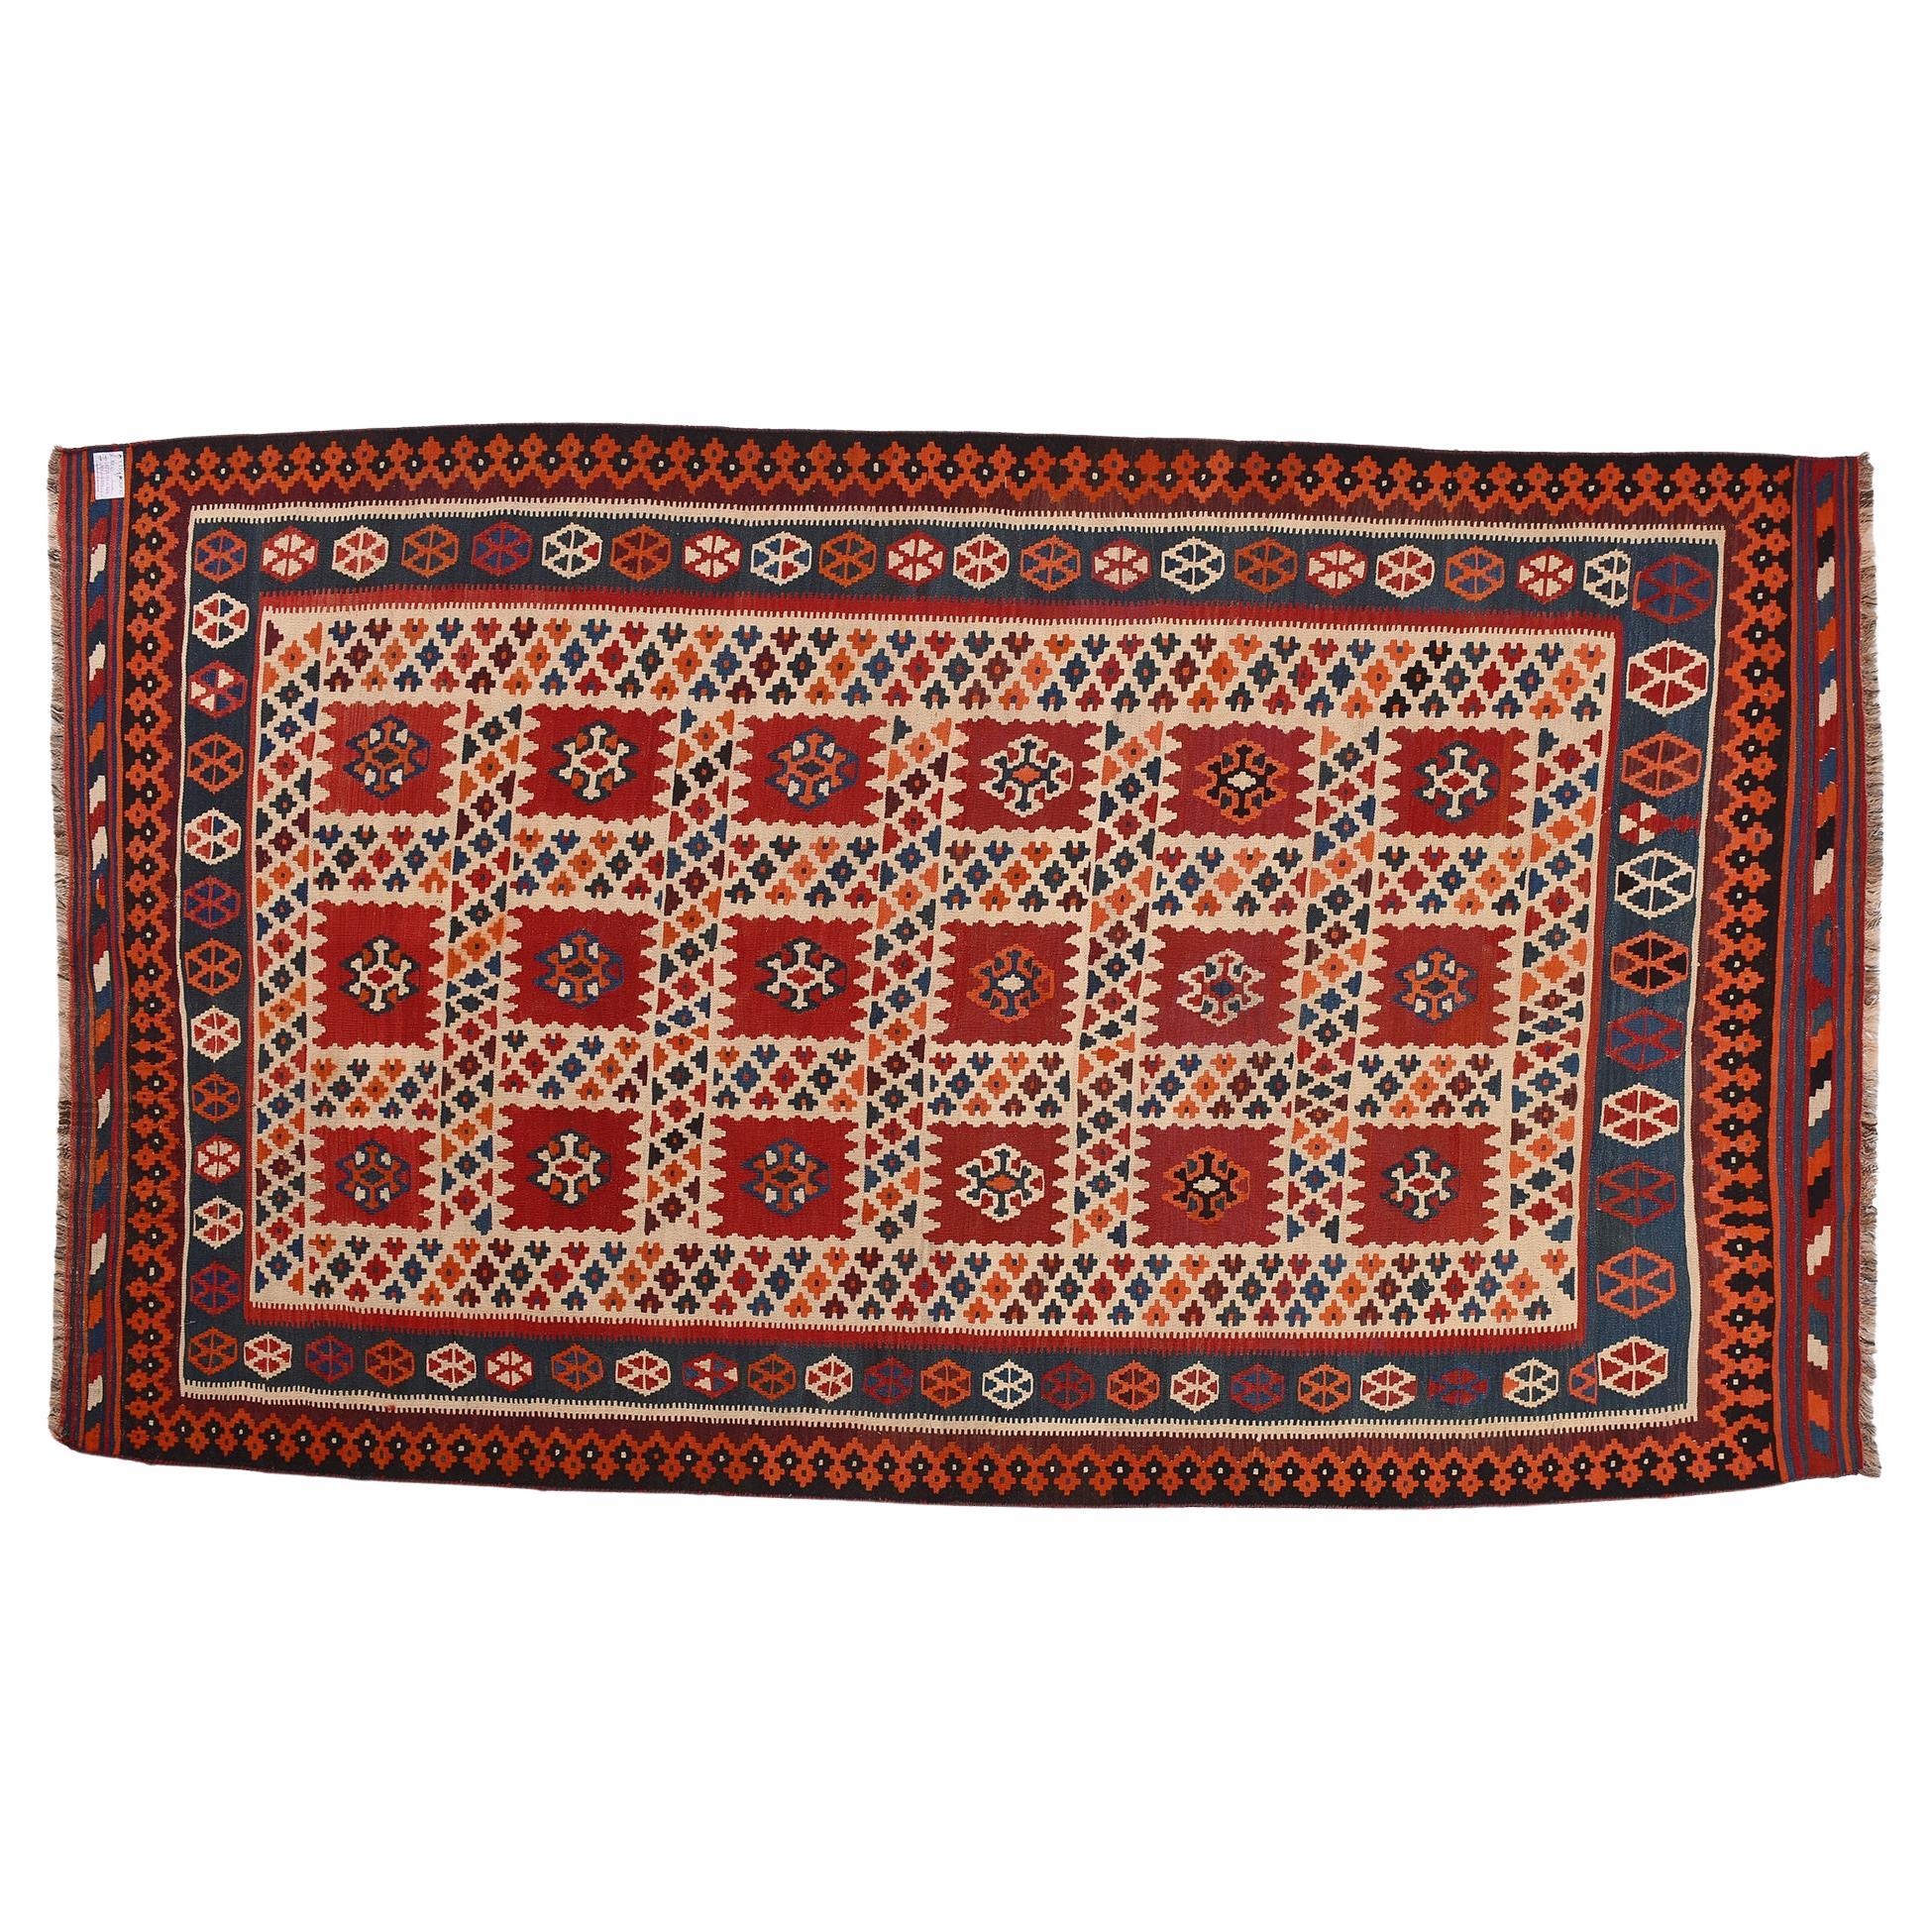 nr. 821 -  Very pleasant kilim, wirh a perfect workmanship, with accurate geometric designs ivory, brick red and blue.
Dense and accurate workmanship.
Now with a very good price for closing activities.